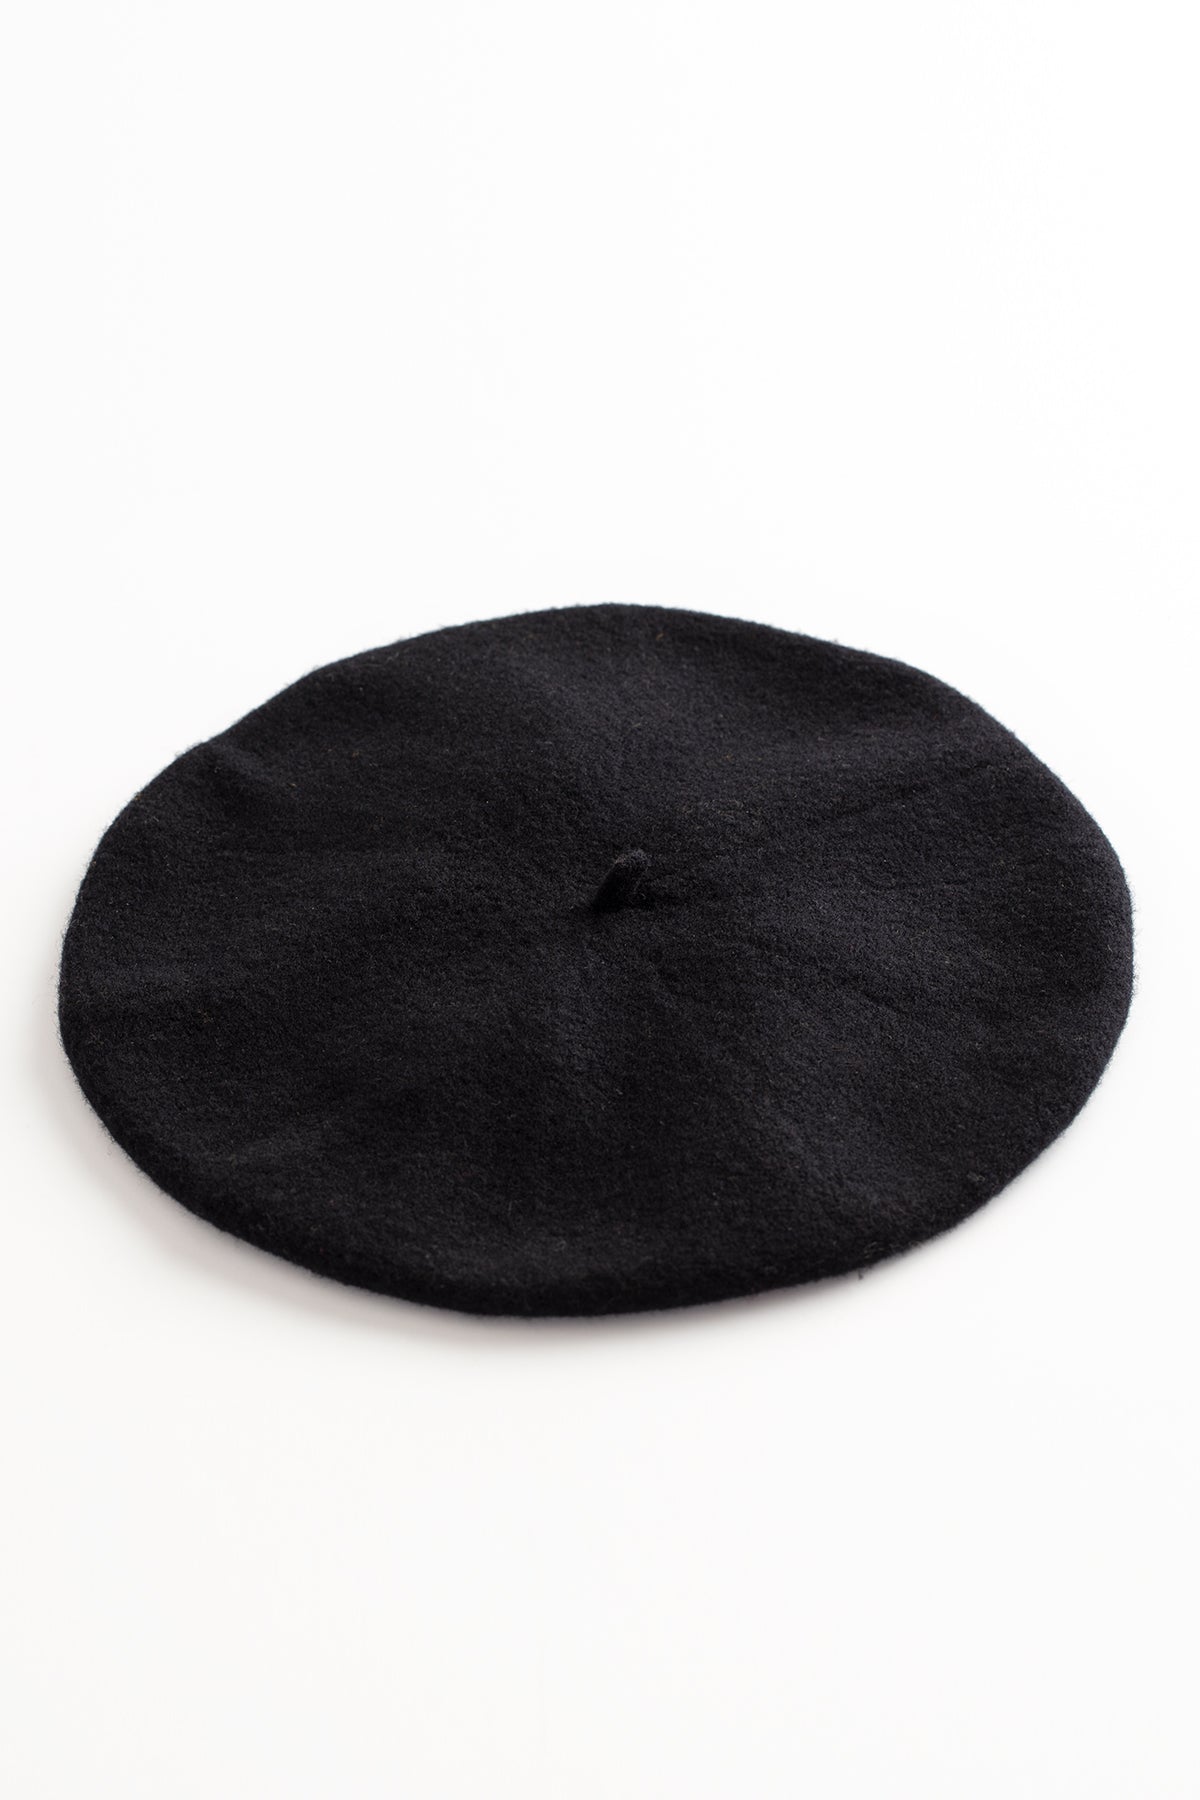 A black Gigi Beret by Hansel from Basel, made of a cozy Merino wool blend, resting on a clean white surface.-615332610129